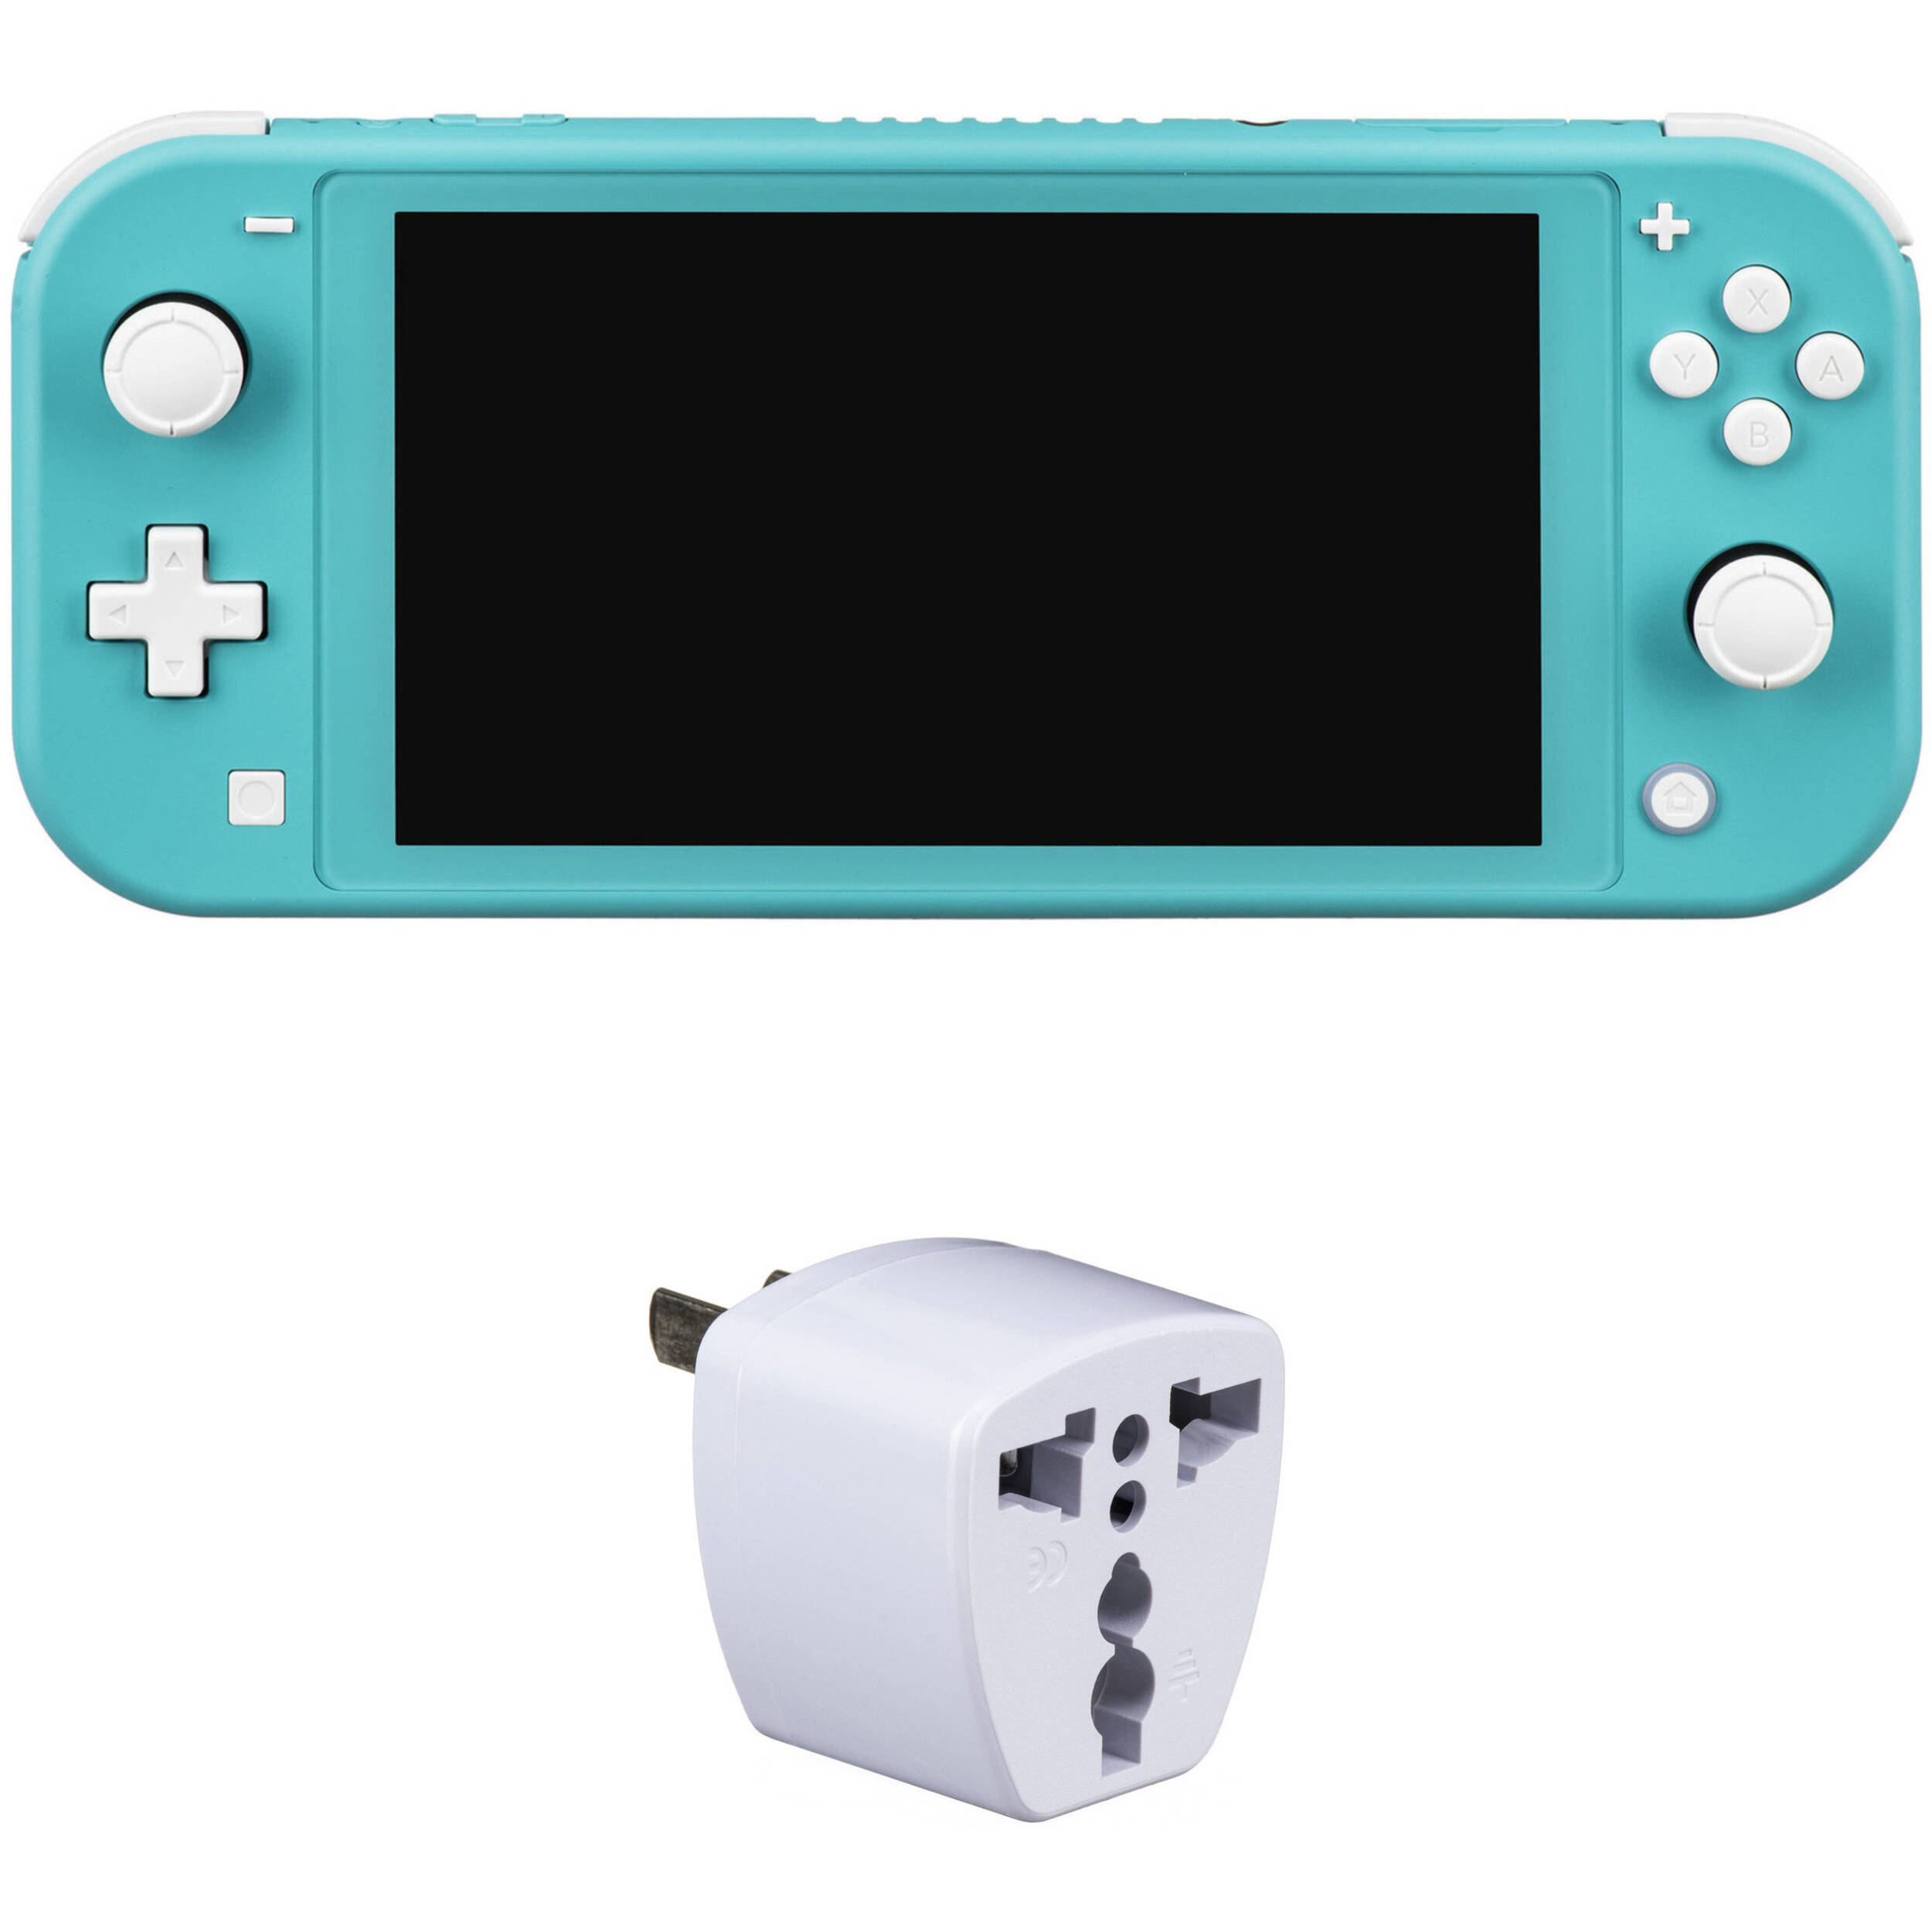 Nintendo Switch Lite Kit With Us Power Adapter Turquoise